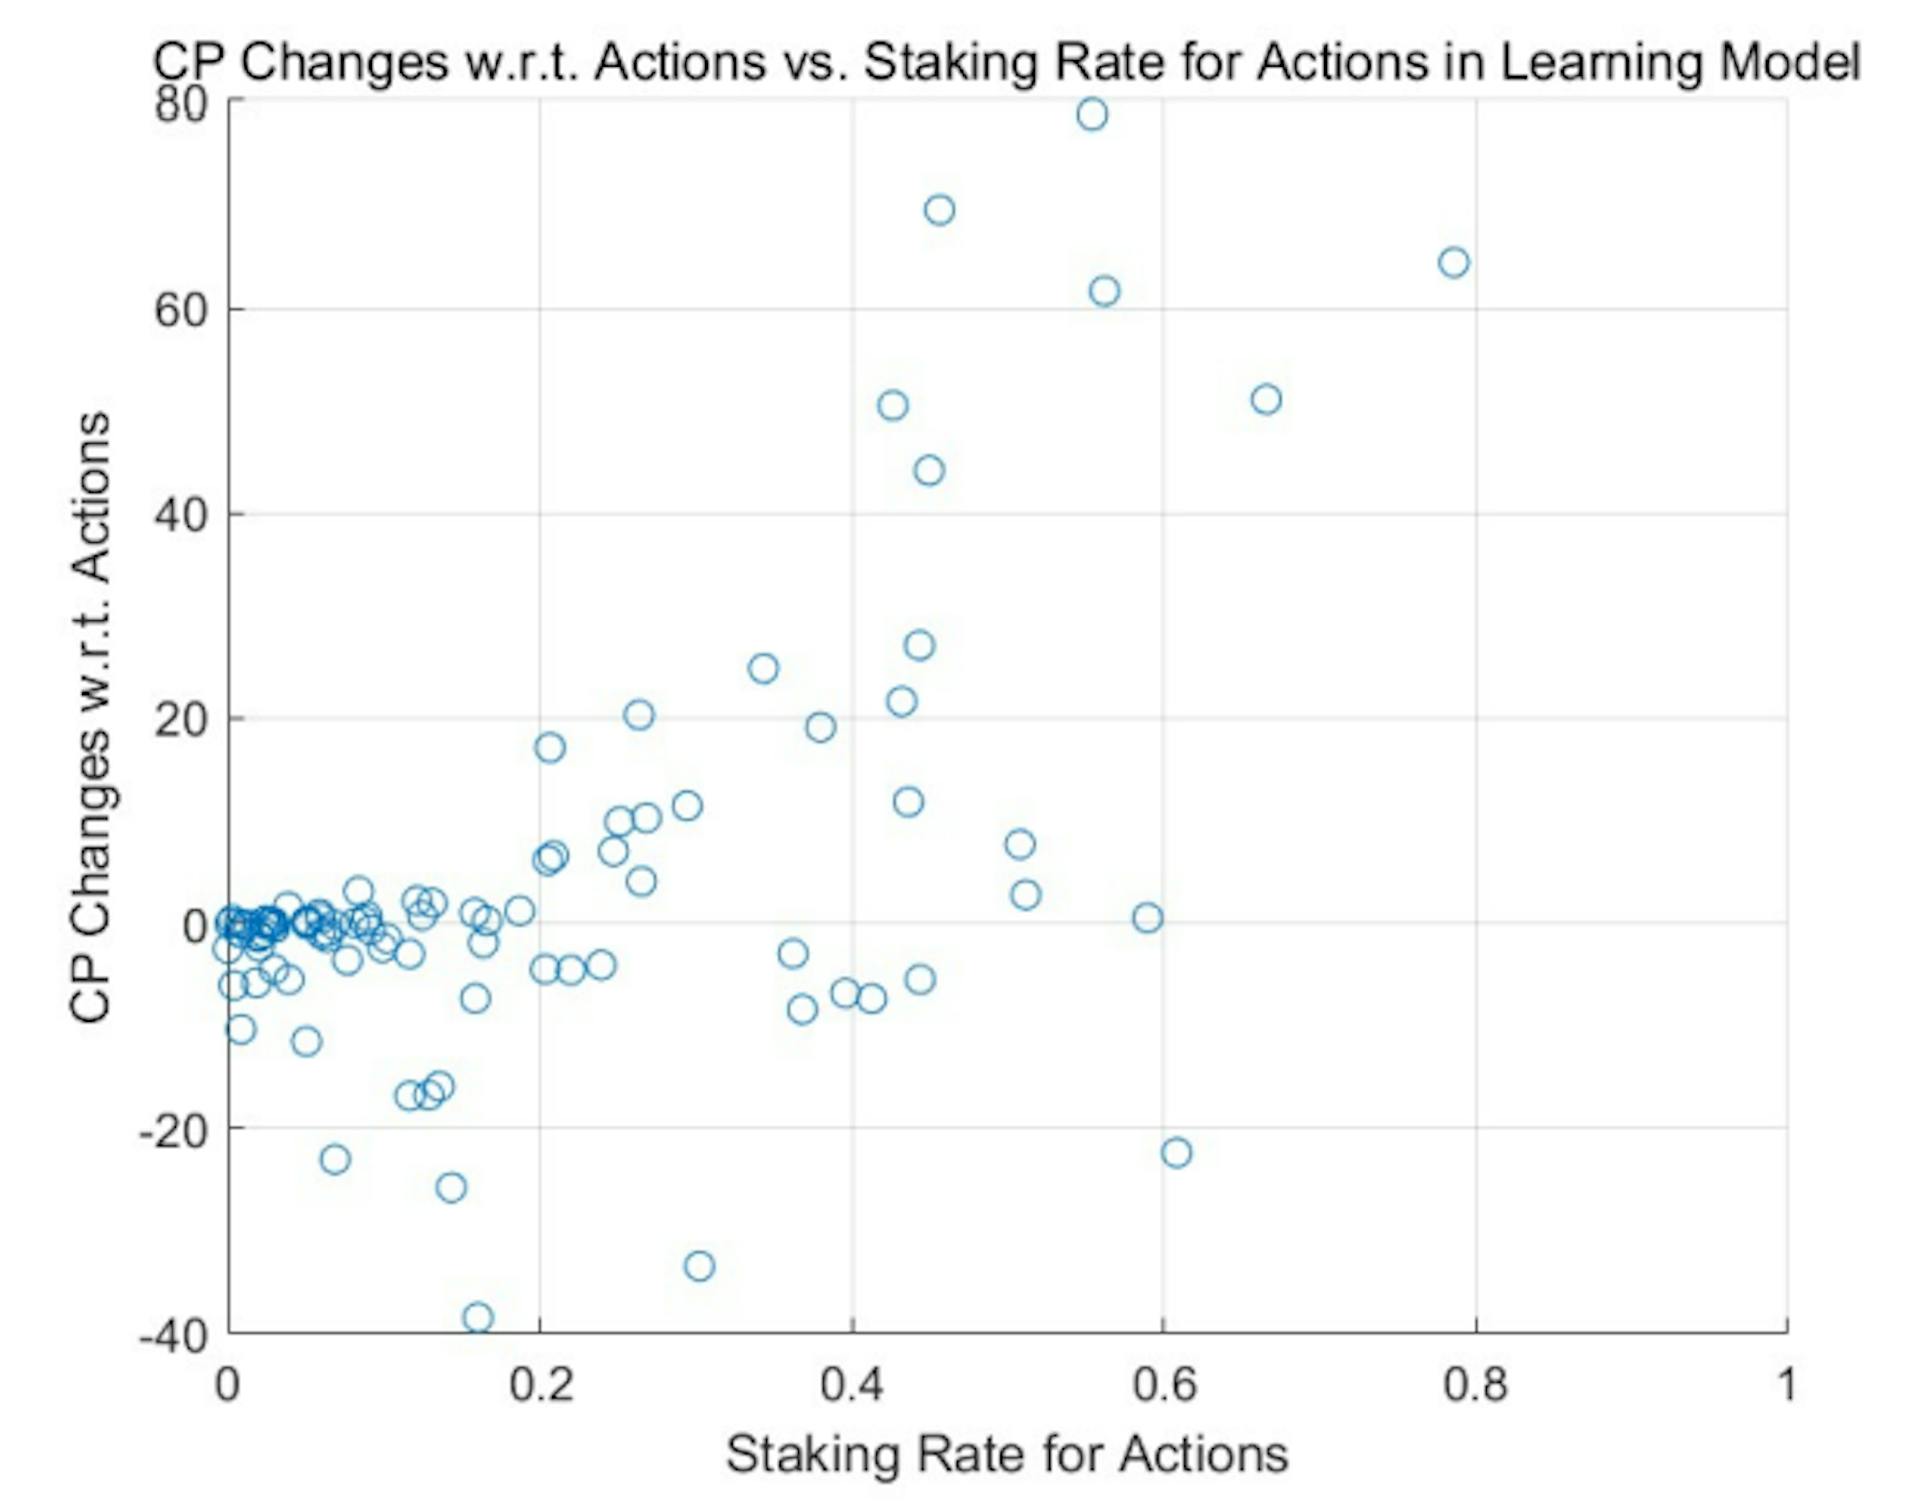 Figure 13: Learning Model with Consumer Selection: Changes of Credit Points over Staking Rate for Actions from the power-law-initial distribution